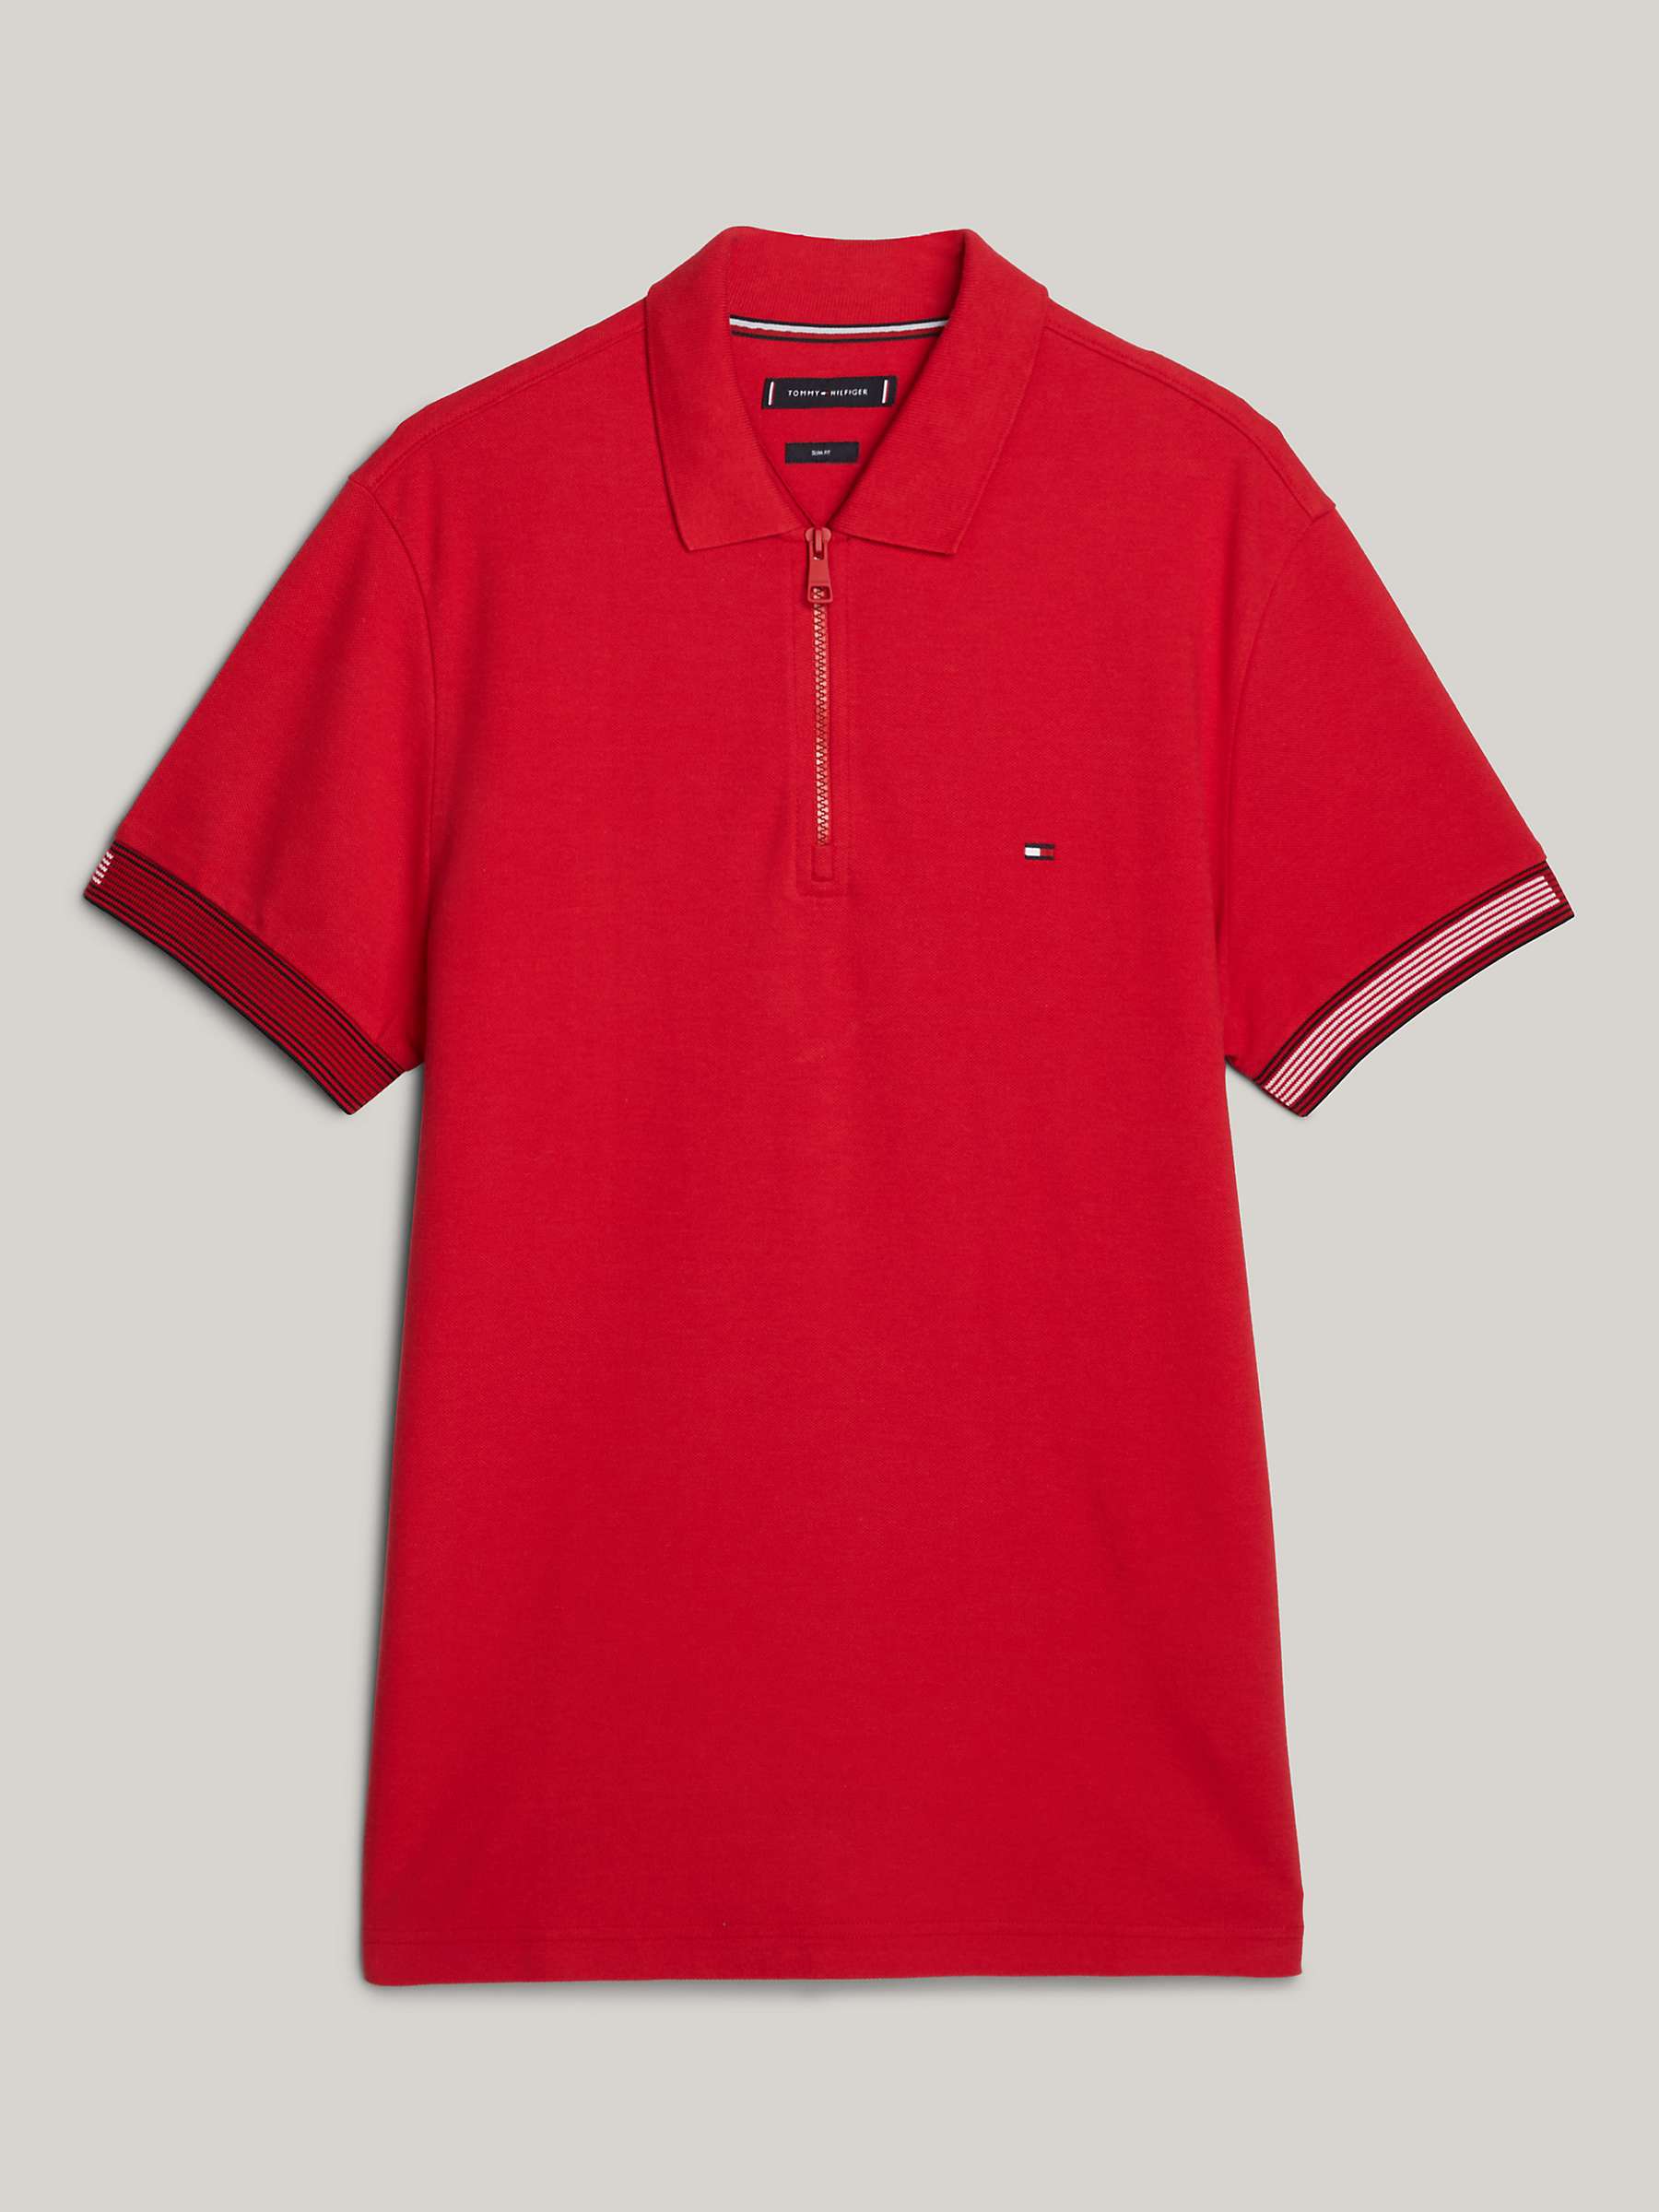 Buy Tommy Hilfiger Adaptive Organic Cotton Blend Slim Fit Polo Shirt, Primary Red Online at johnlewis.com